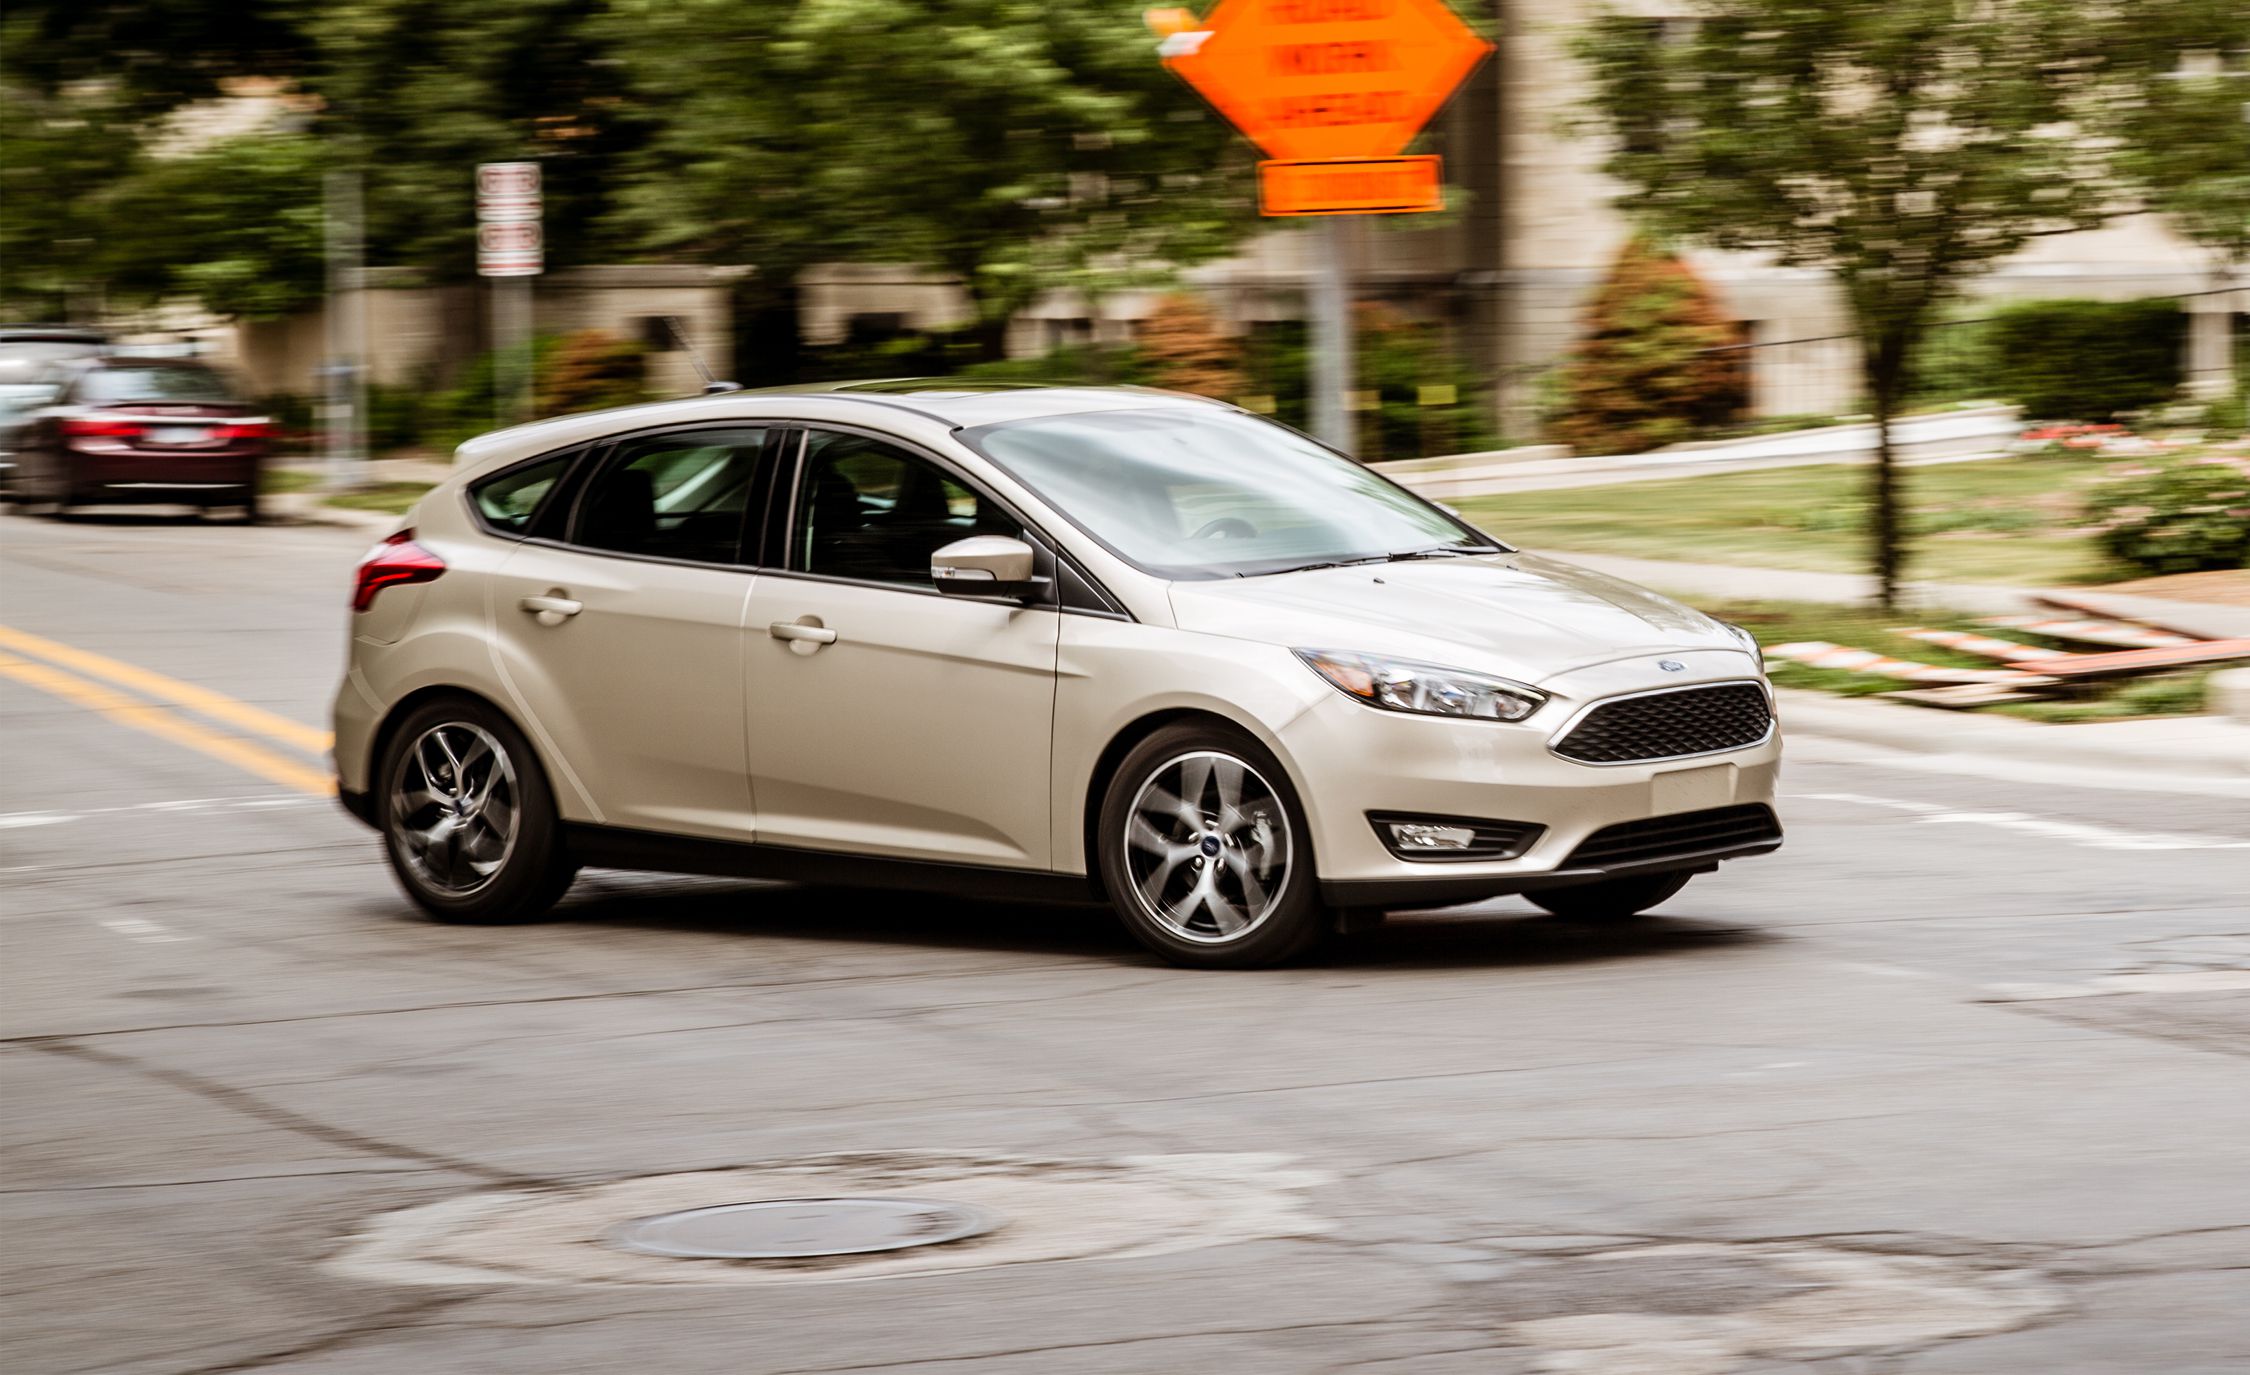 2016 Ford Focus Sedan 1.0-Liter Turbo Automatic Test | Review | Car ...